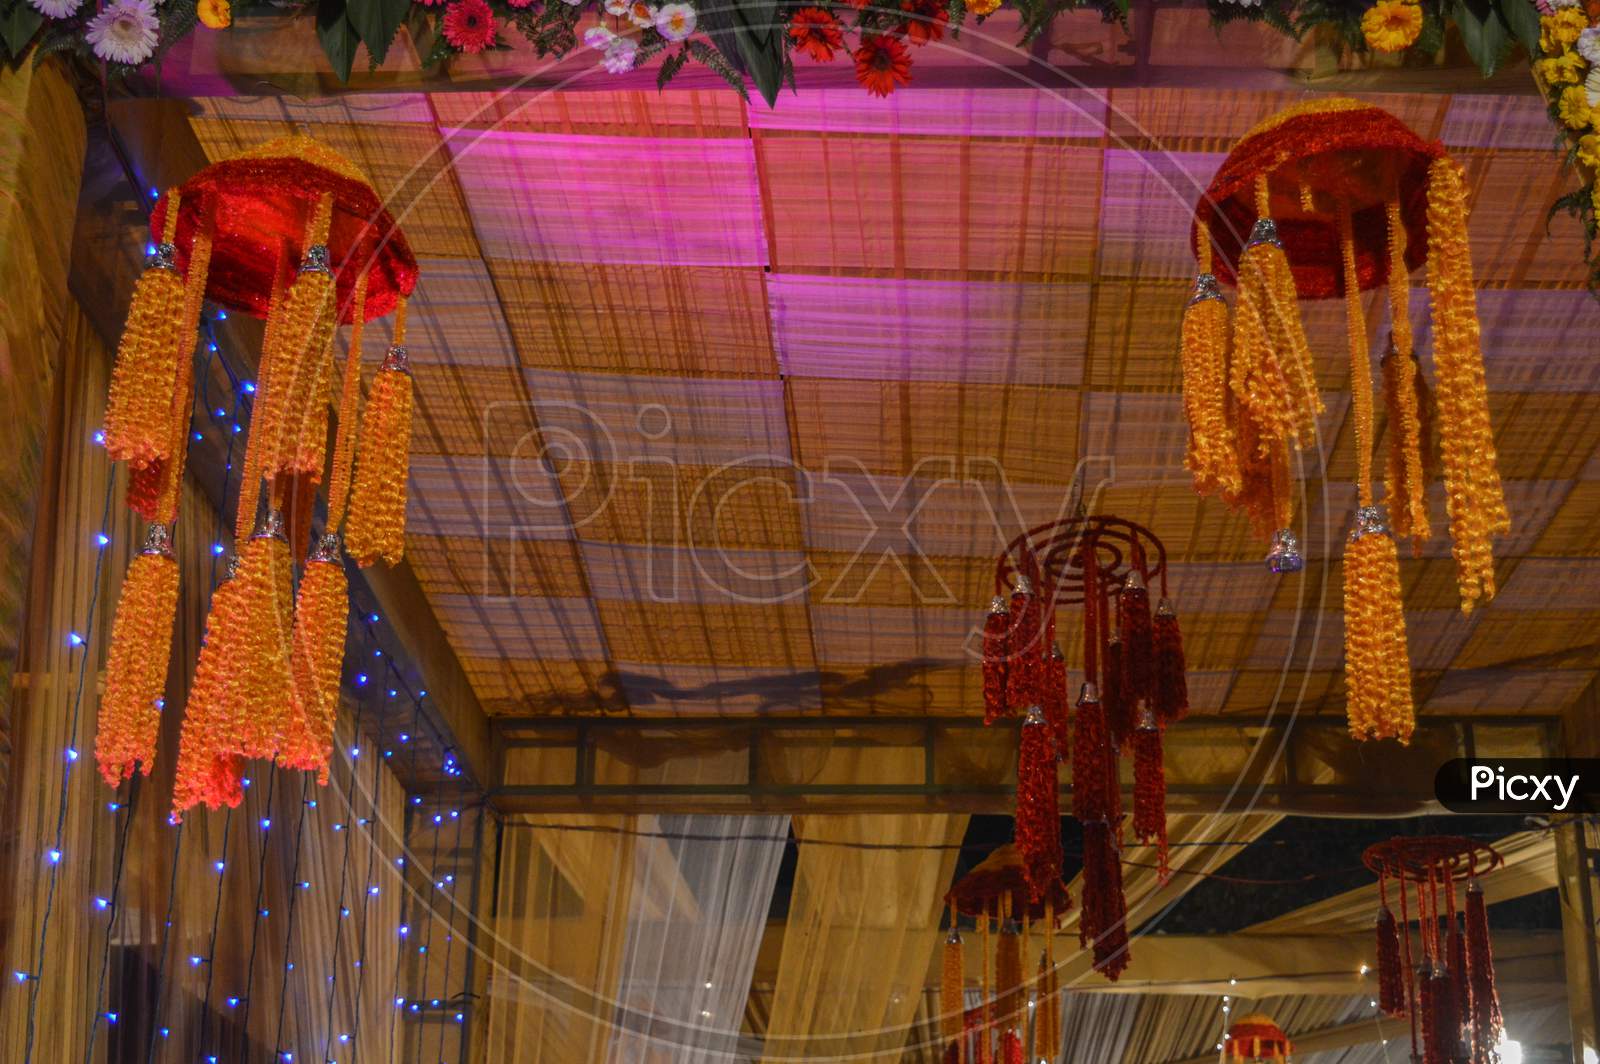 A Beautiful Hanger Decoration In Indian Wedding With Fairy Lights.